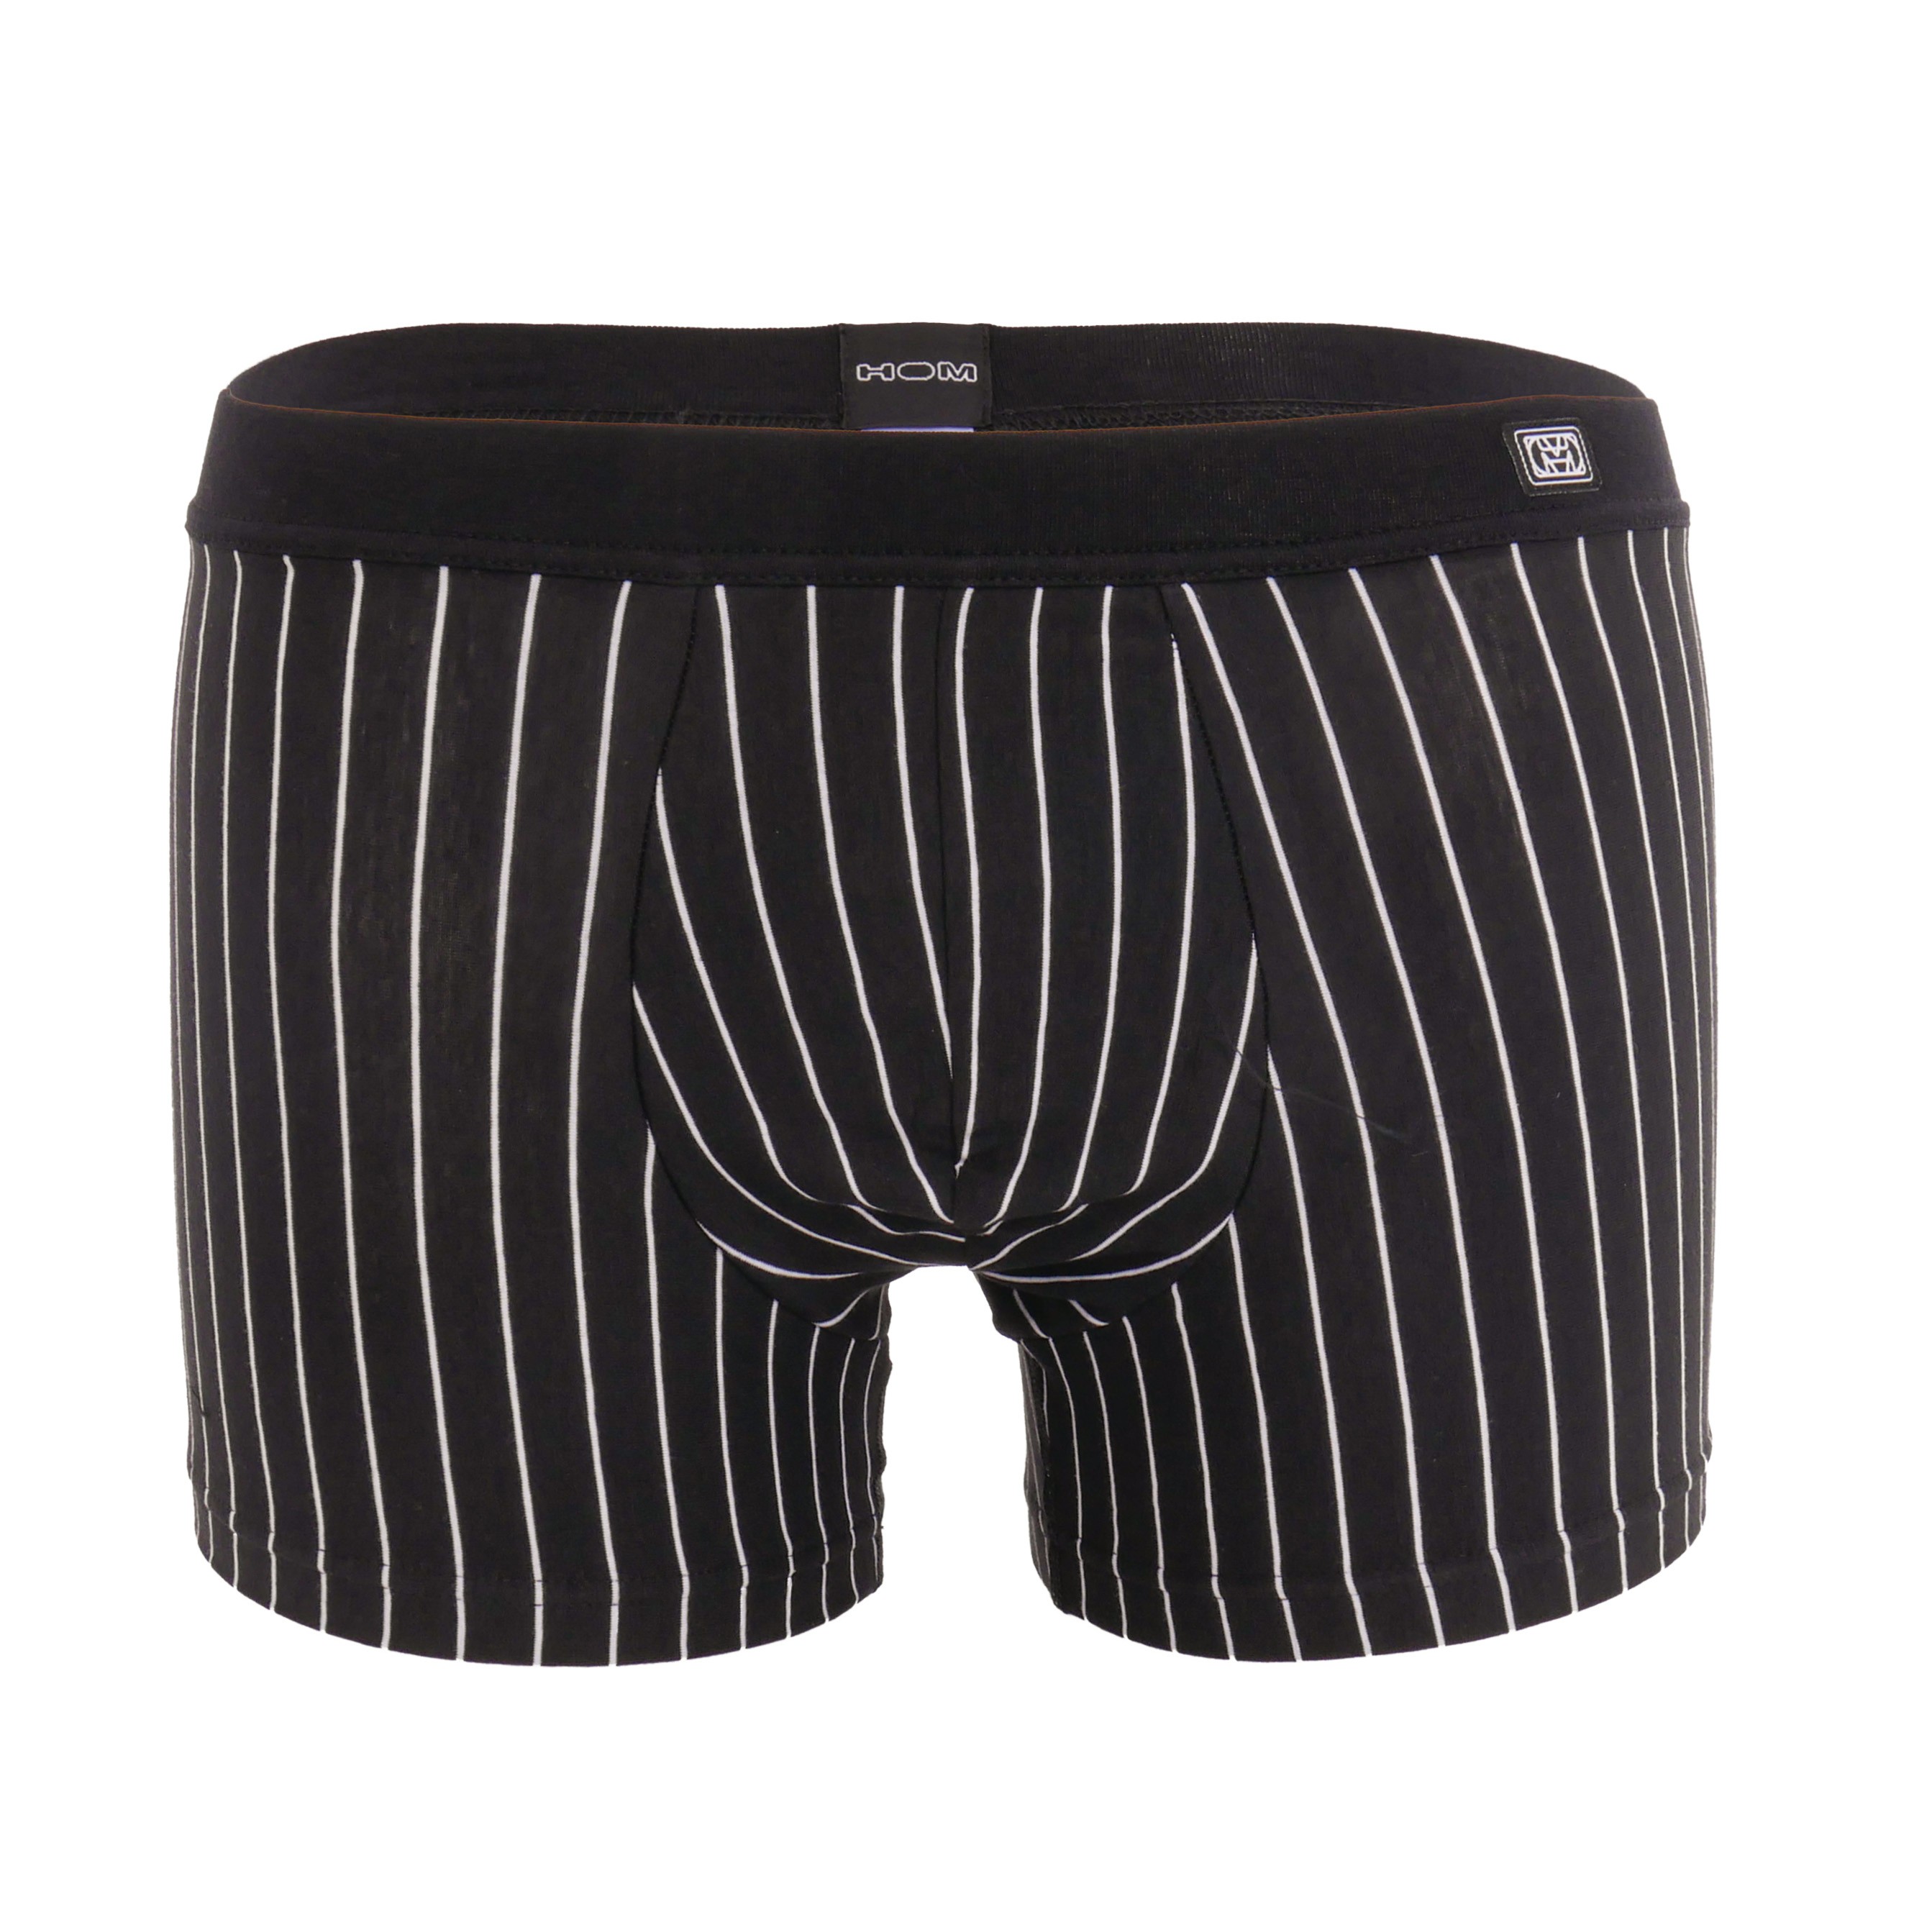 Aix Boxer Briefs: Boxers for man brand HOM for sale online at luniv